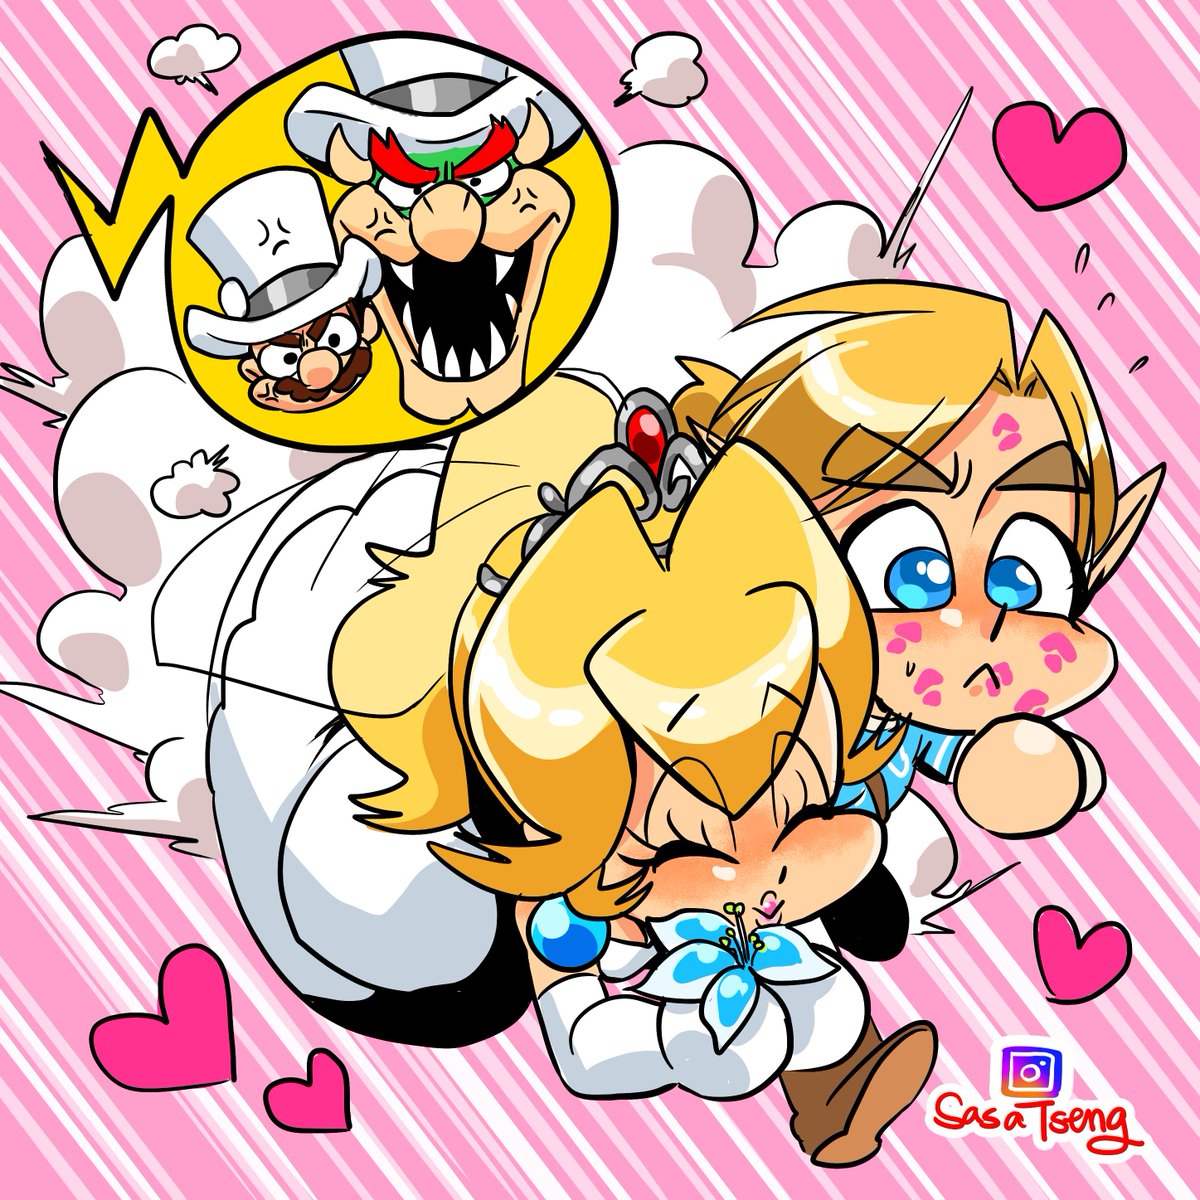 this is how Mario Odyssey should end ゼ ル ダ の 伝 説 ピ-チ 姫 #crossover ス-パ-マ リ オ...